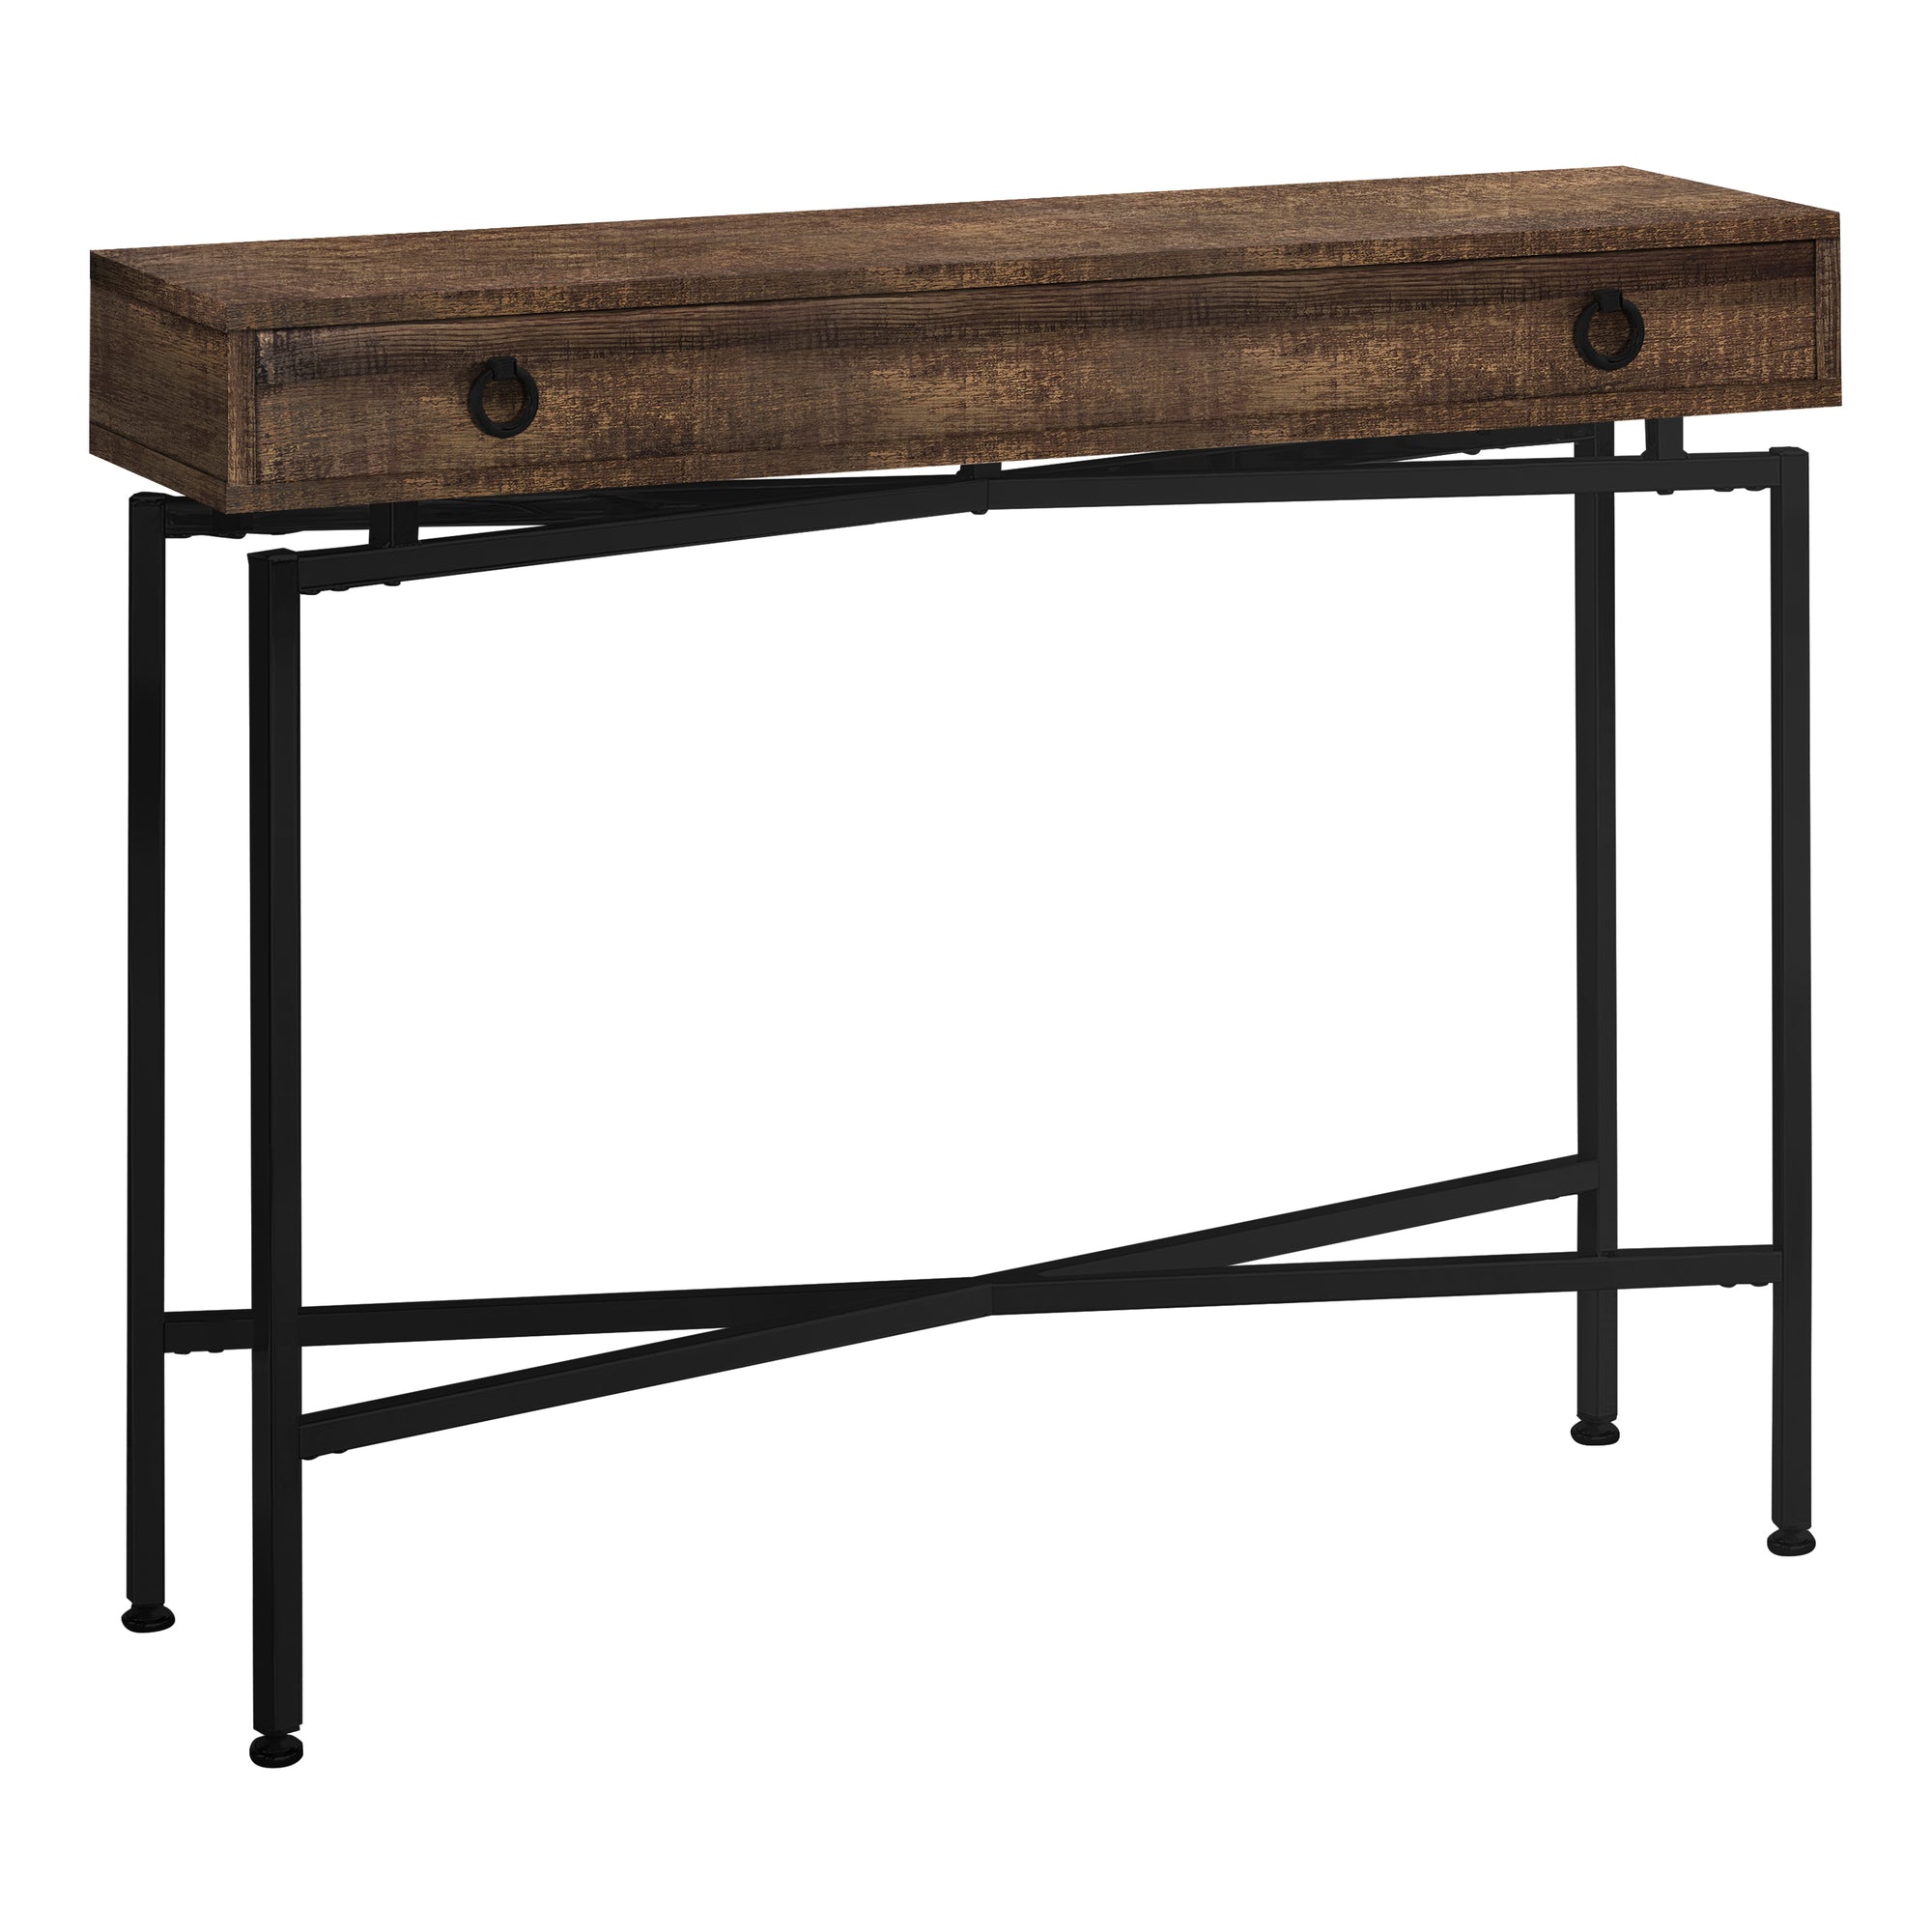 MN-713453    Accent Table, Console, Entryway, Narrow, Sofa, Living Room, Bedroom, Metal Legs, Laminate, Brown Reclaimed Wood Look, Black, Contemporary, Modern